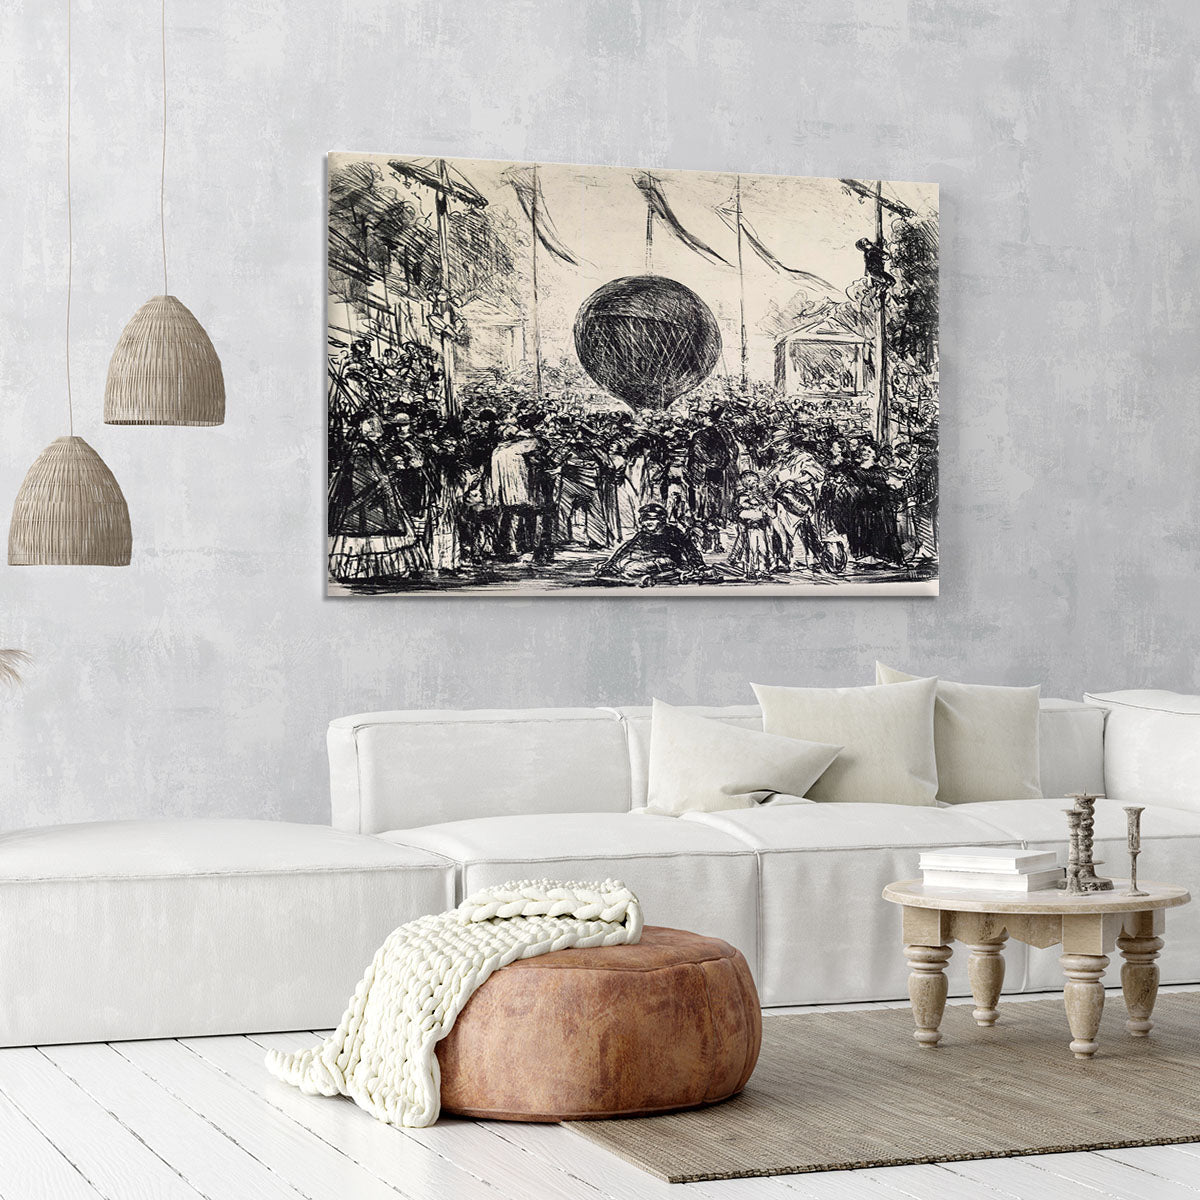 The Balloon by Manet Canvas Print or Poster - Canvas Art Rocks - 6